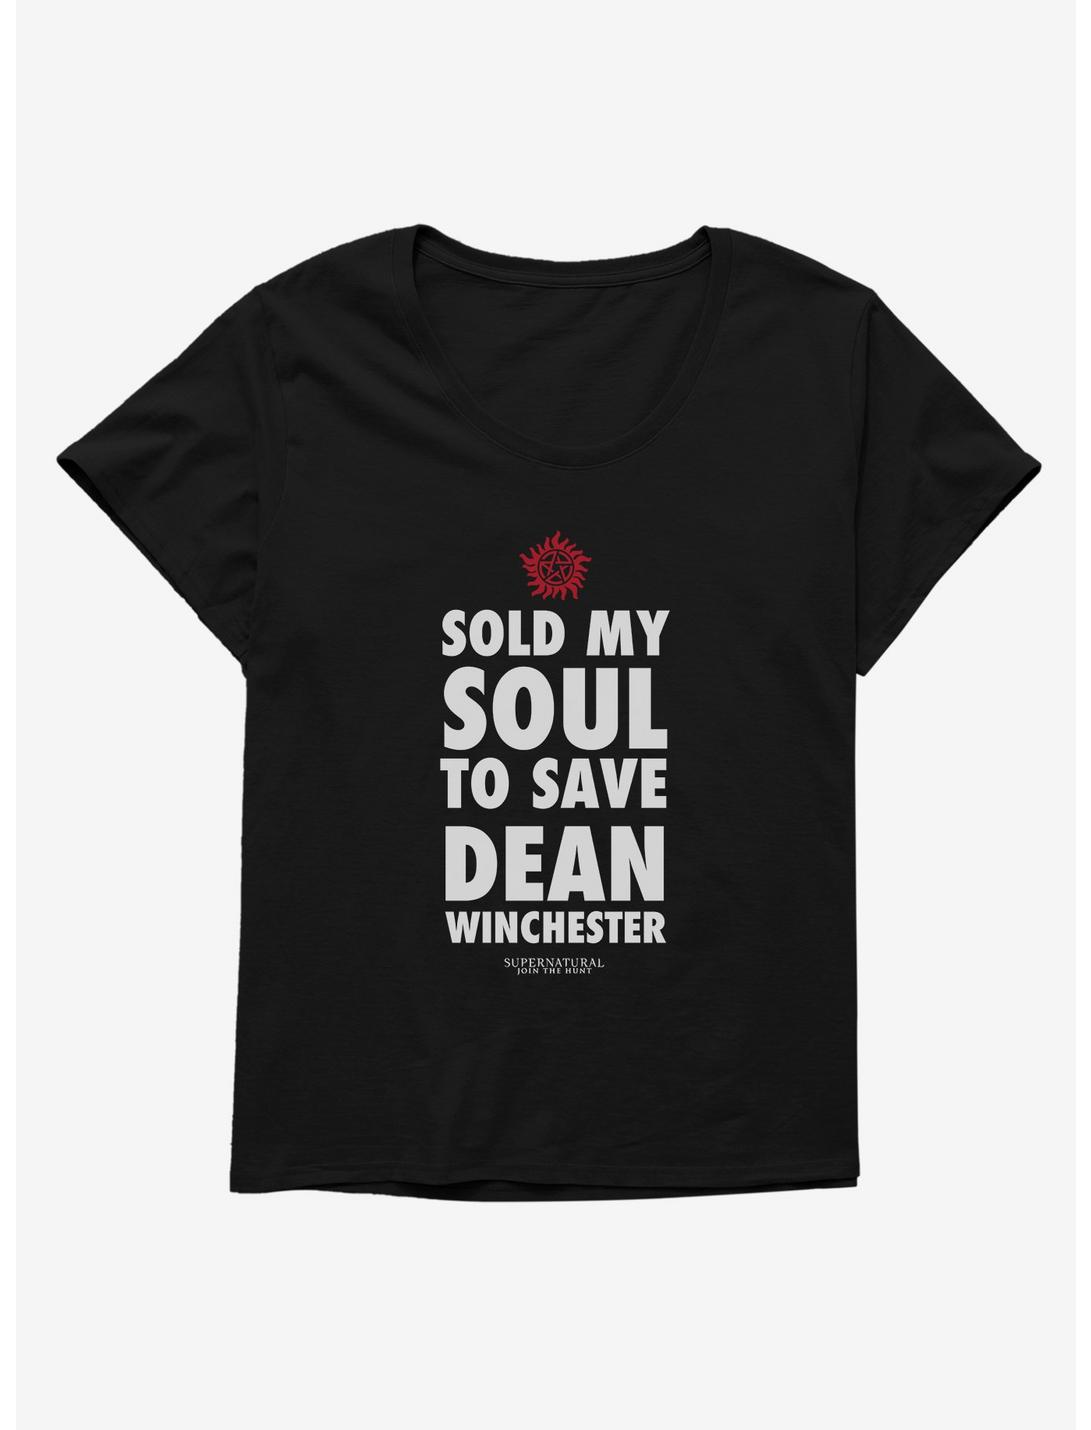 Supernatural Sold My Soul To Save Dean Winchester Womens Plus Size T-Shirt, , hi-res